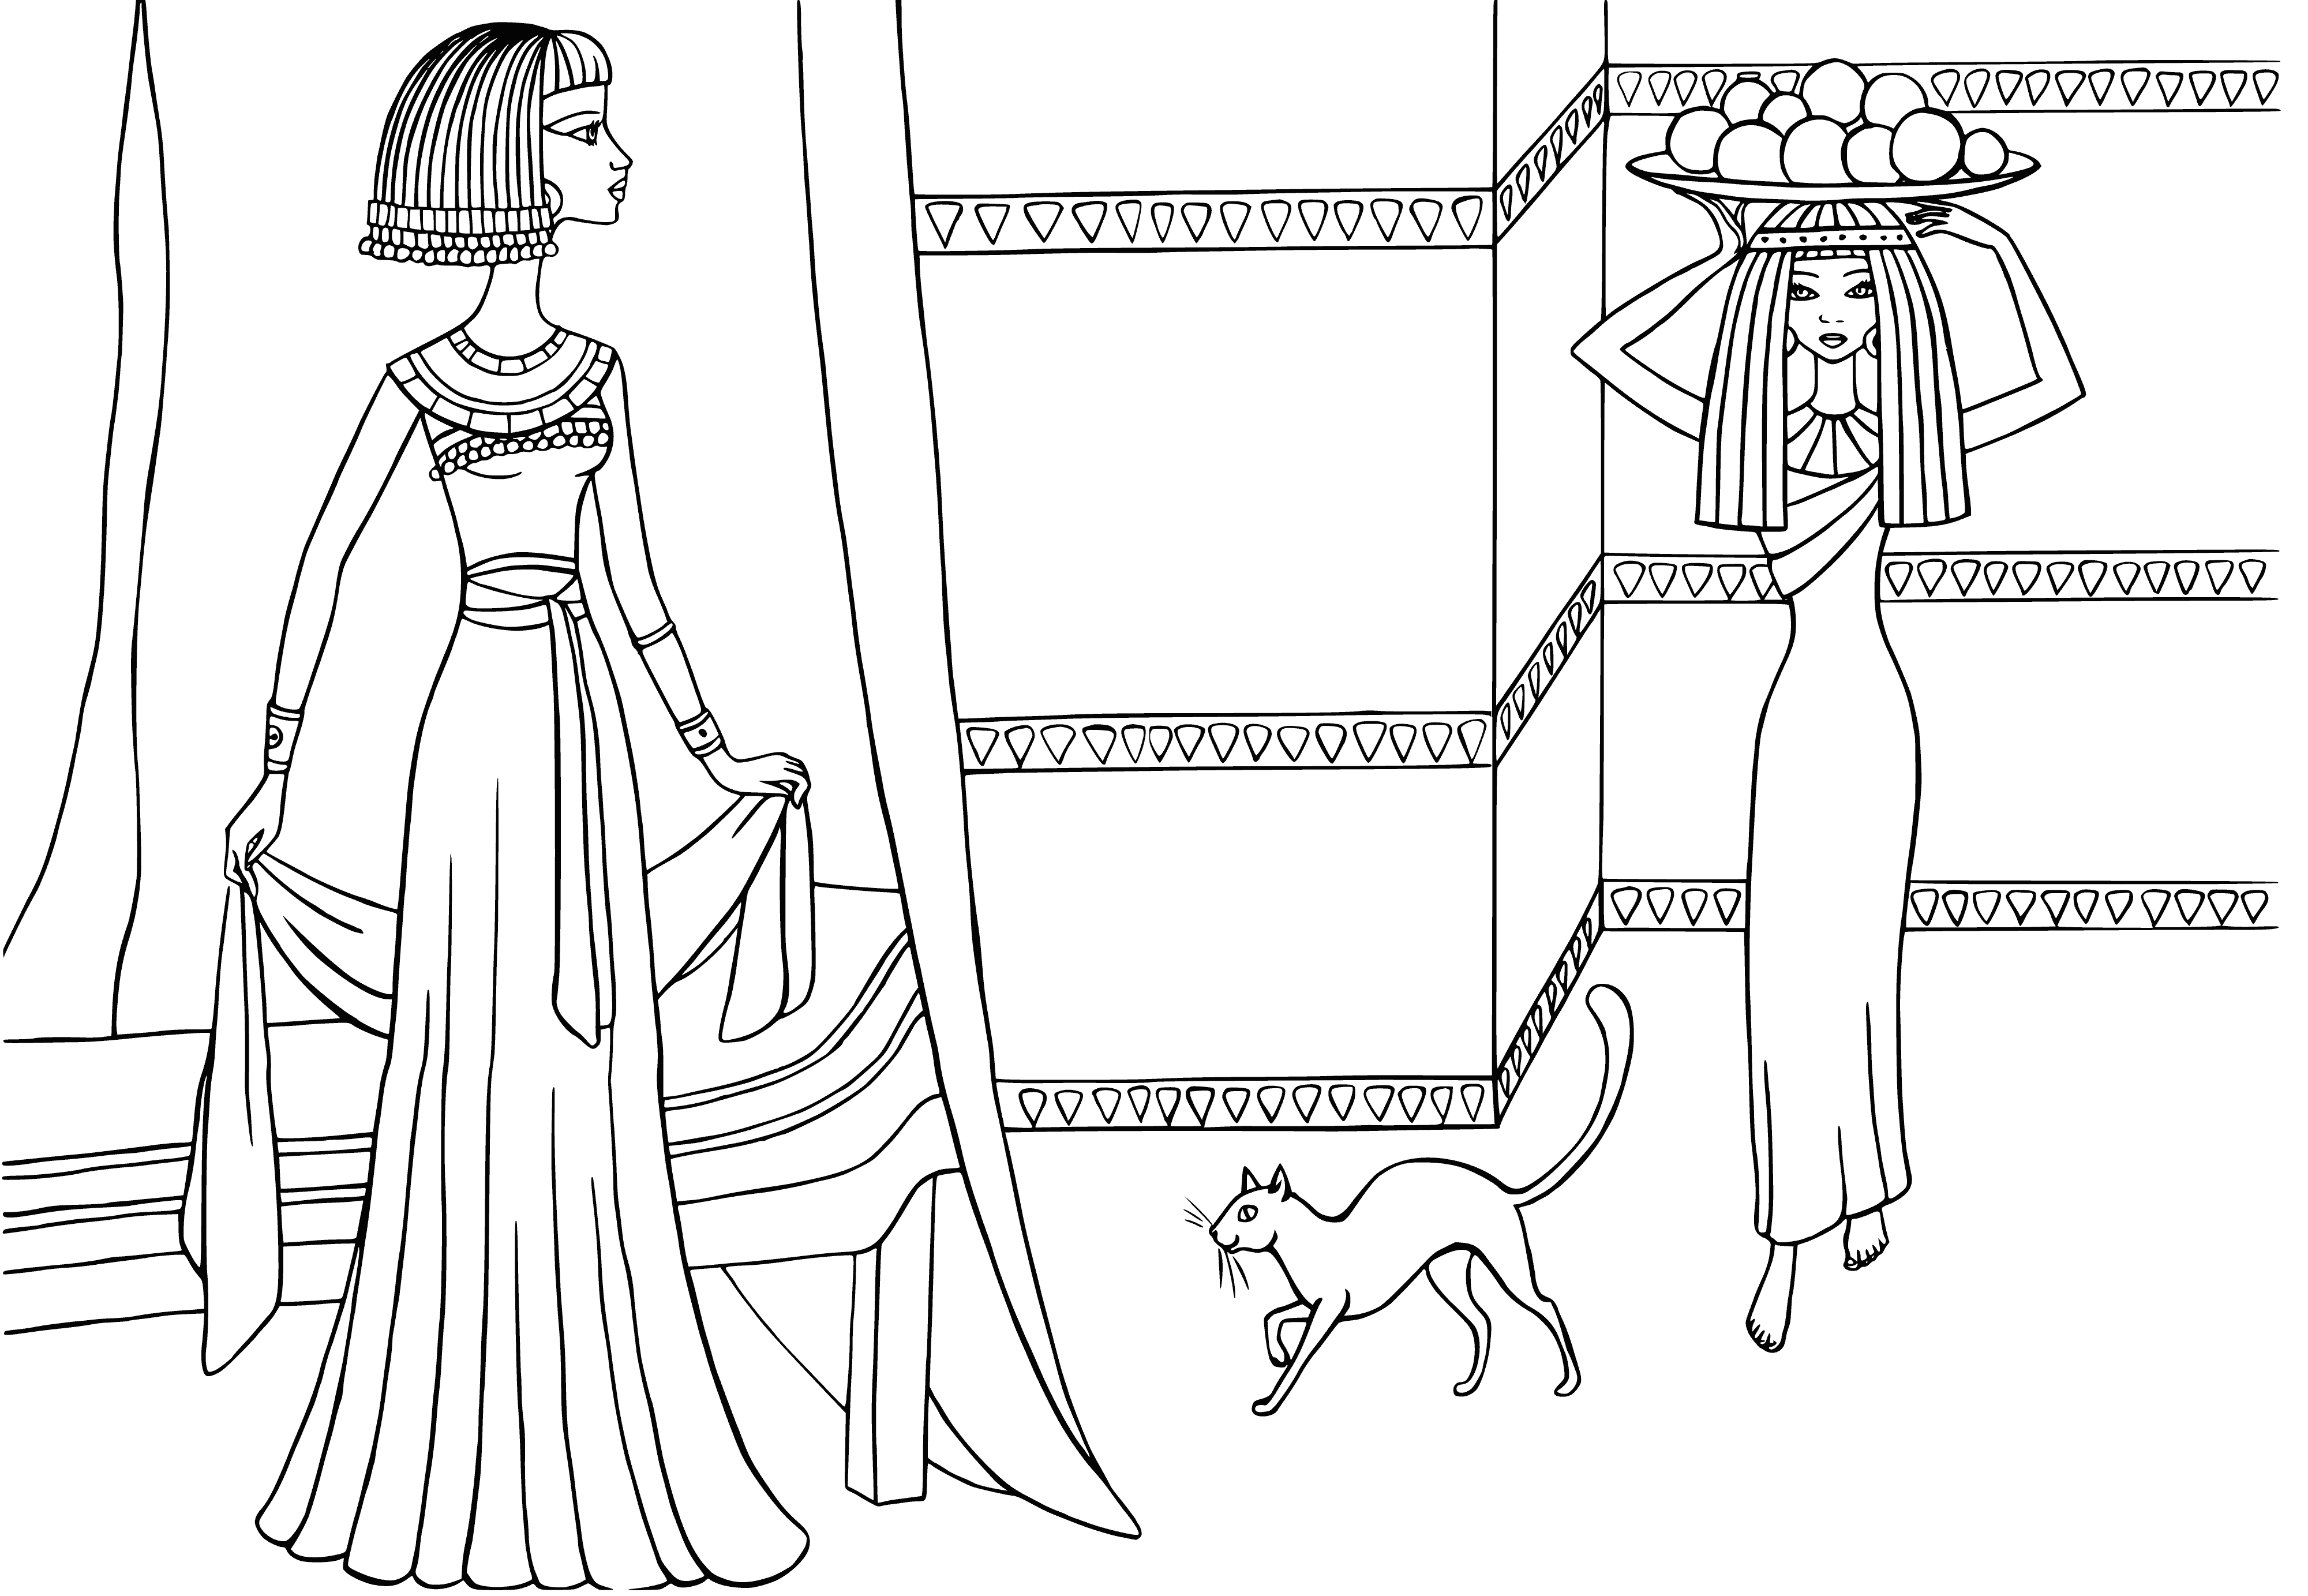 coloring page: The Fairy Kingdom is said to be a place of great beauty and magic, hidden from mortal eyes and only accessible to those with the ability to see beyond our world.